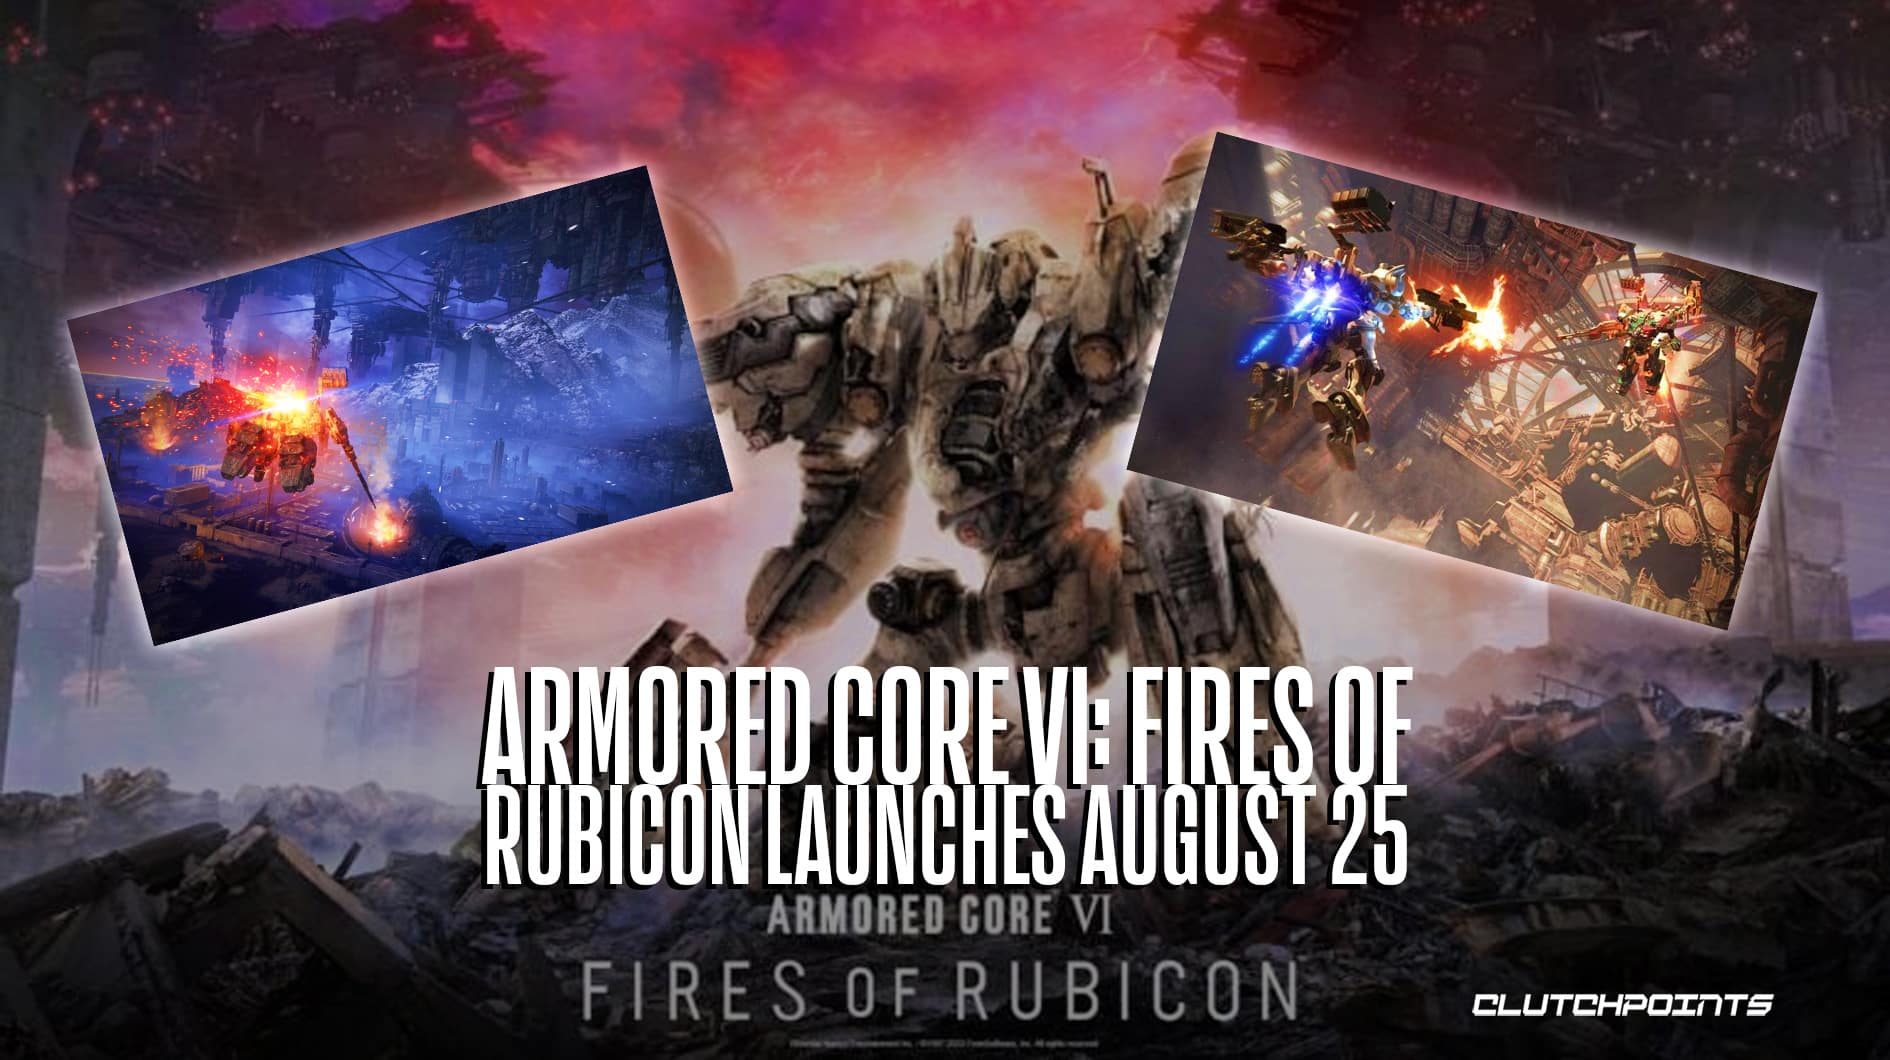 Armored Core VI: Fires of Rubicon Confirmed for Fall Release